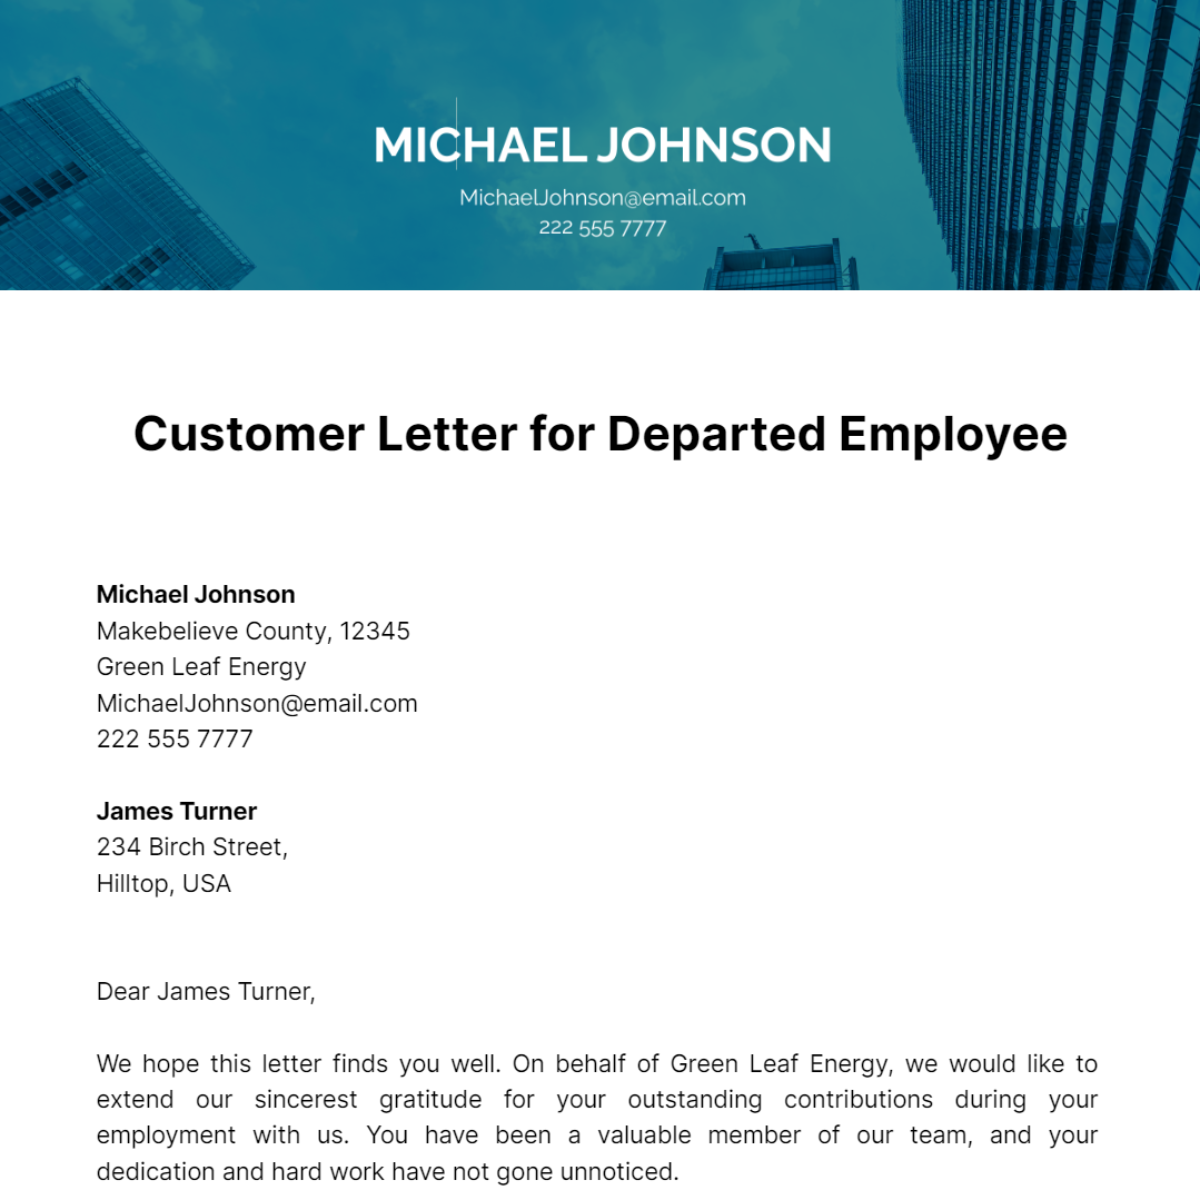 Customer Letter For Departed Employee Template